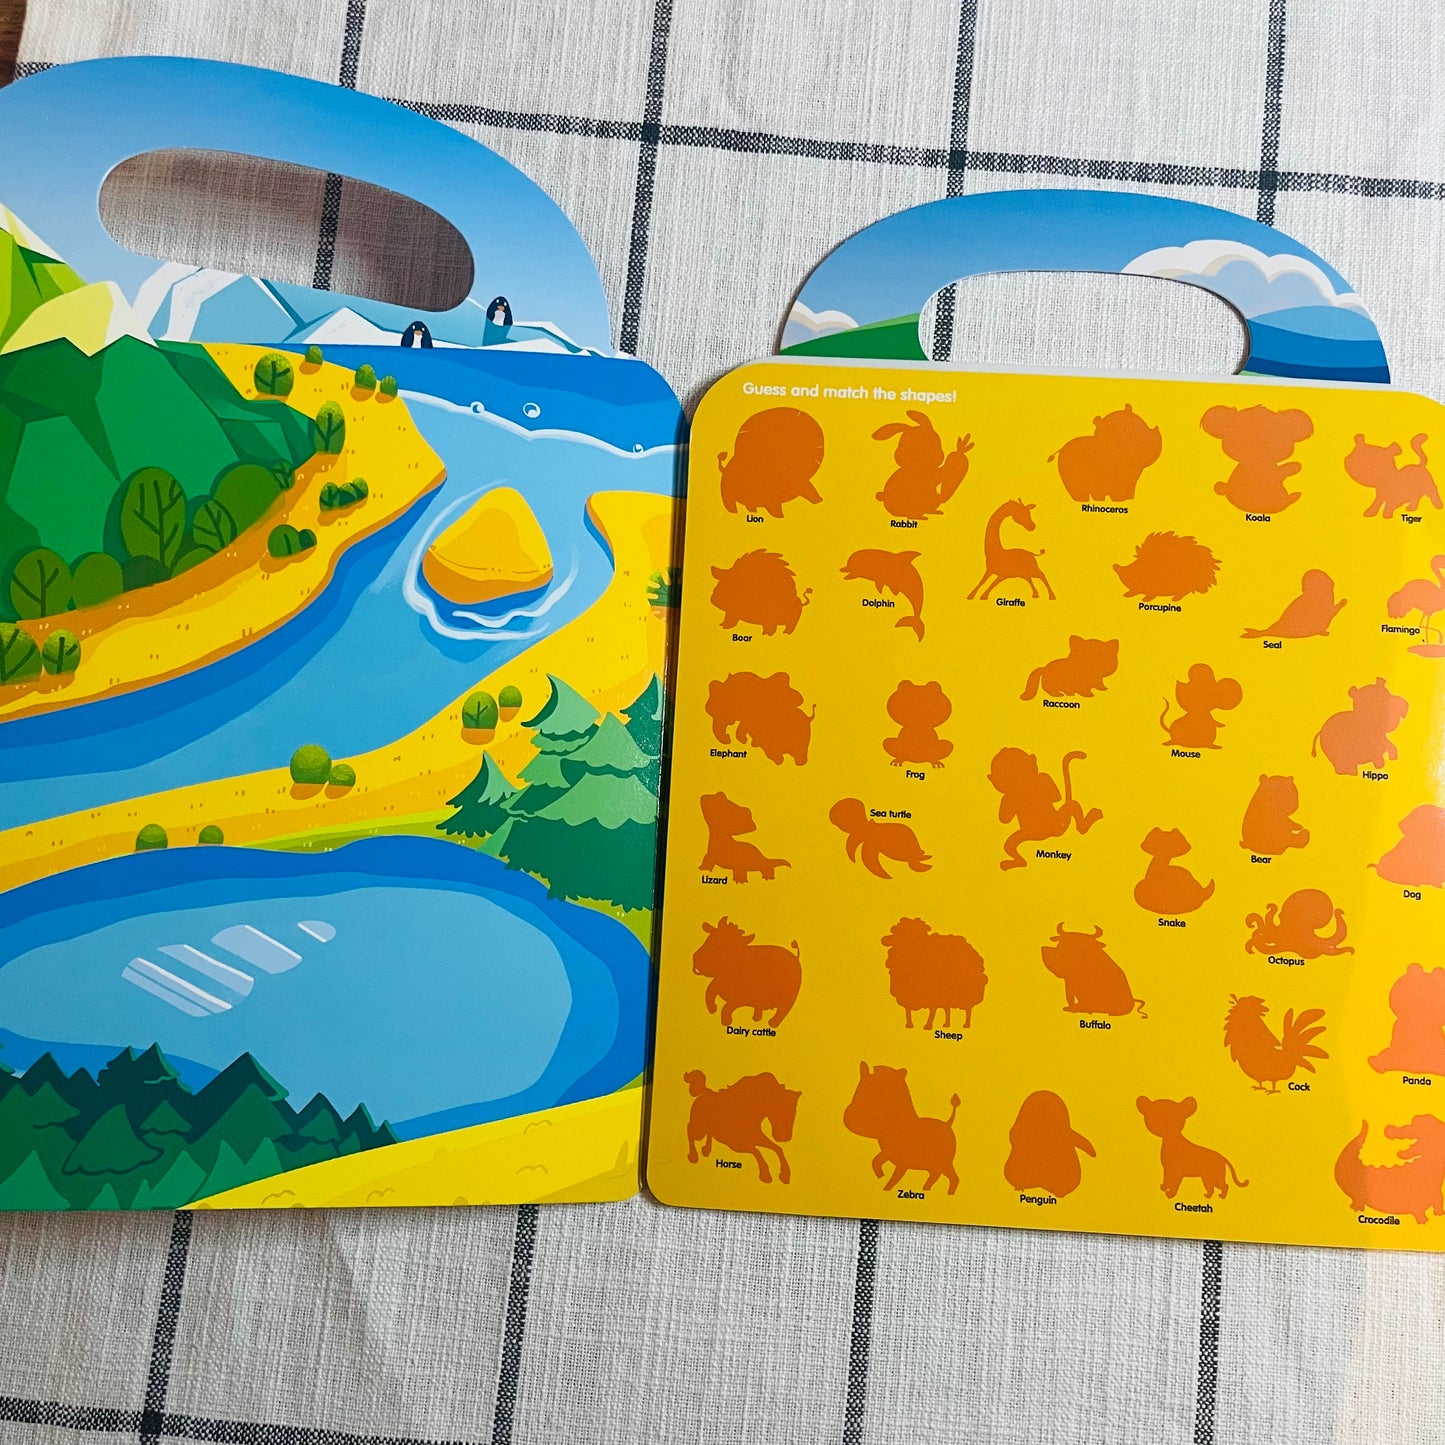 Re-useable Sticker Book | Animal